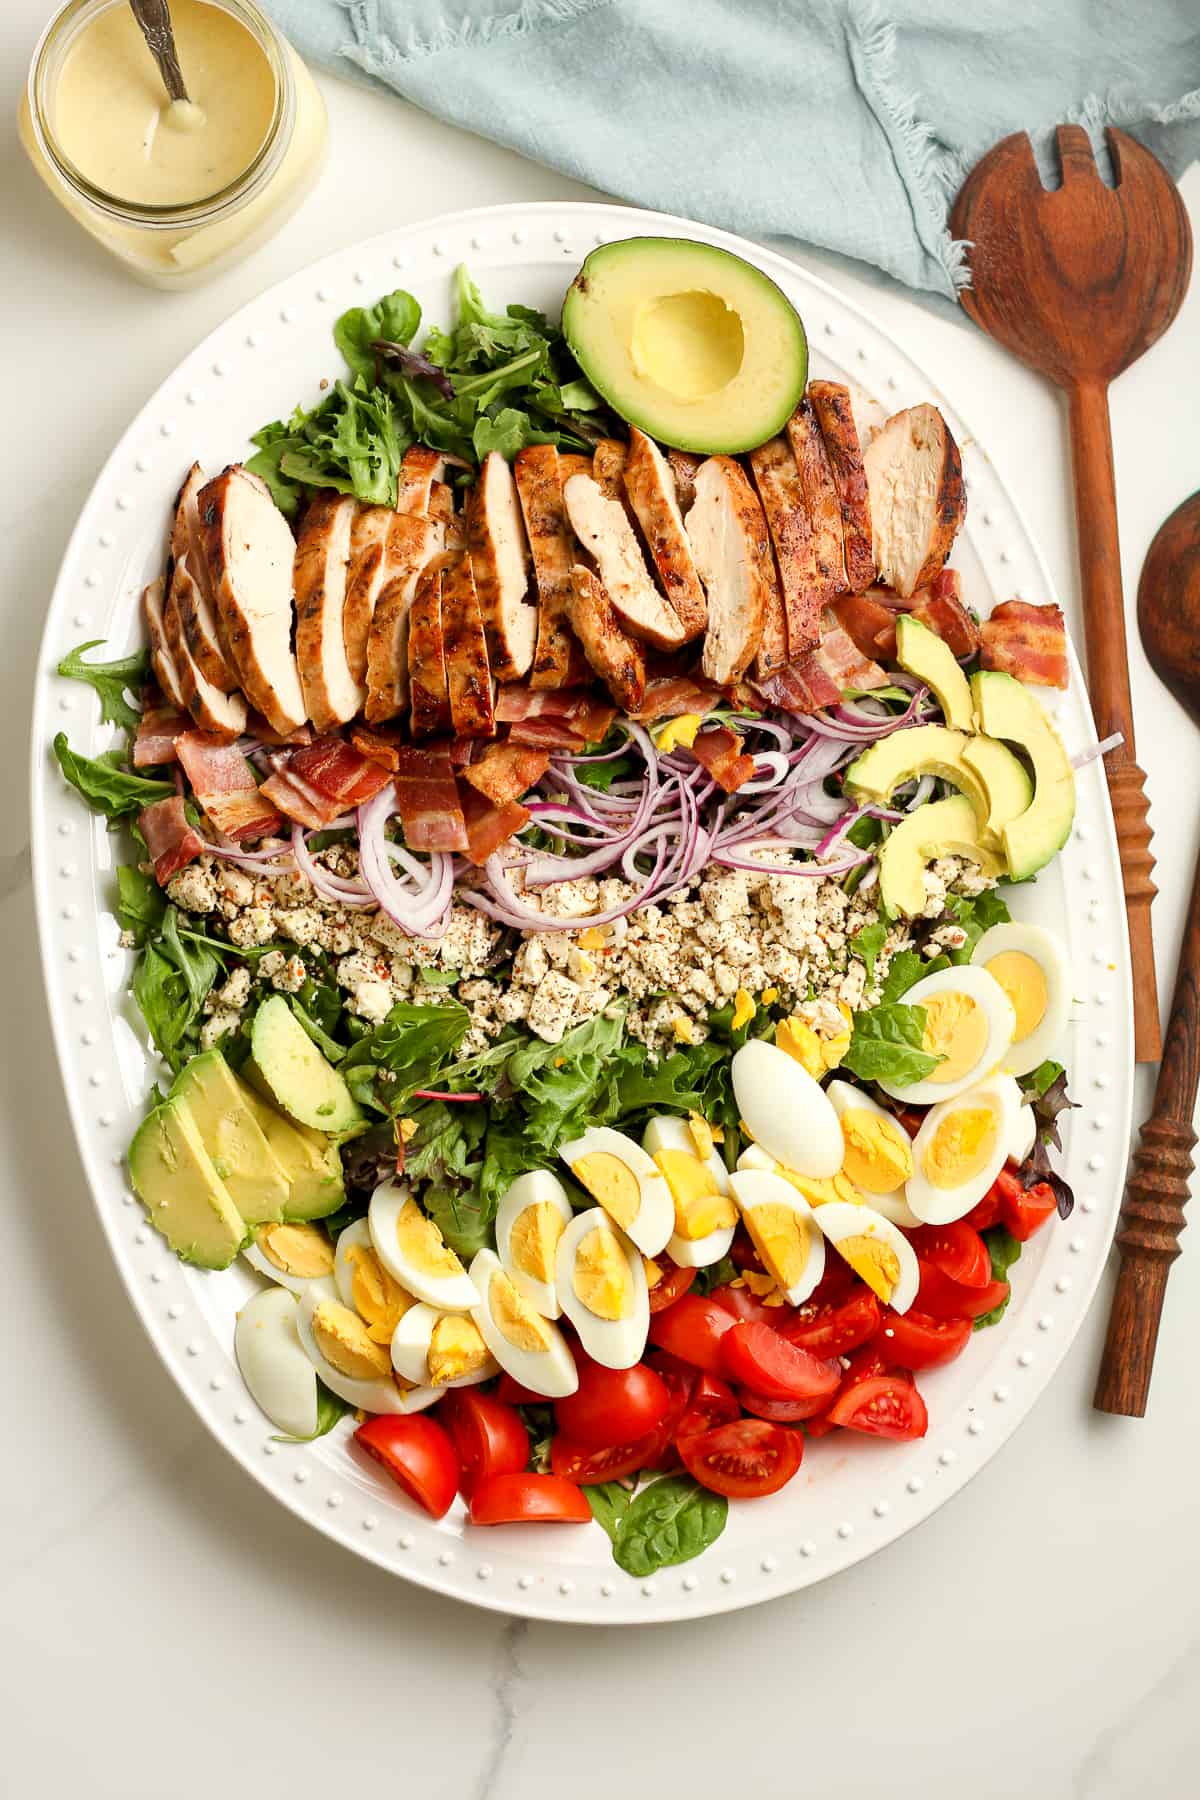 A large platter of the green salad, with rows of grilled chicken, feta cheese, eggs, tomatoes, etc.